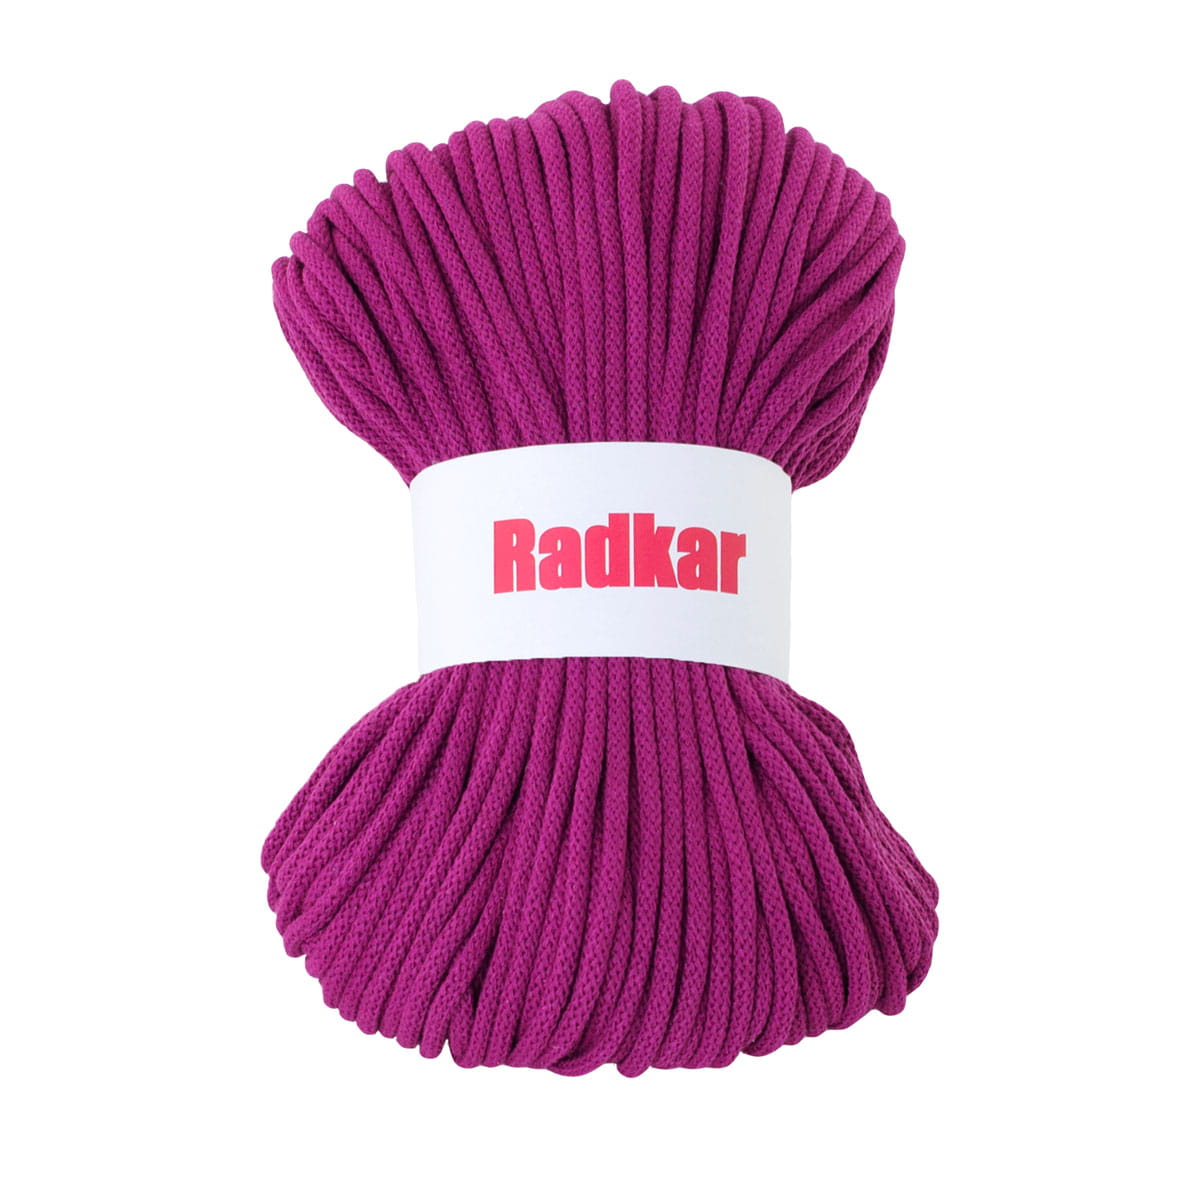 cotton cord 5mm violet braided macrame cord waive craft crochetting